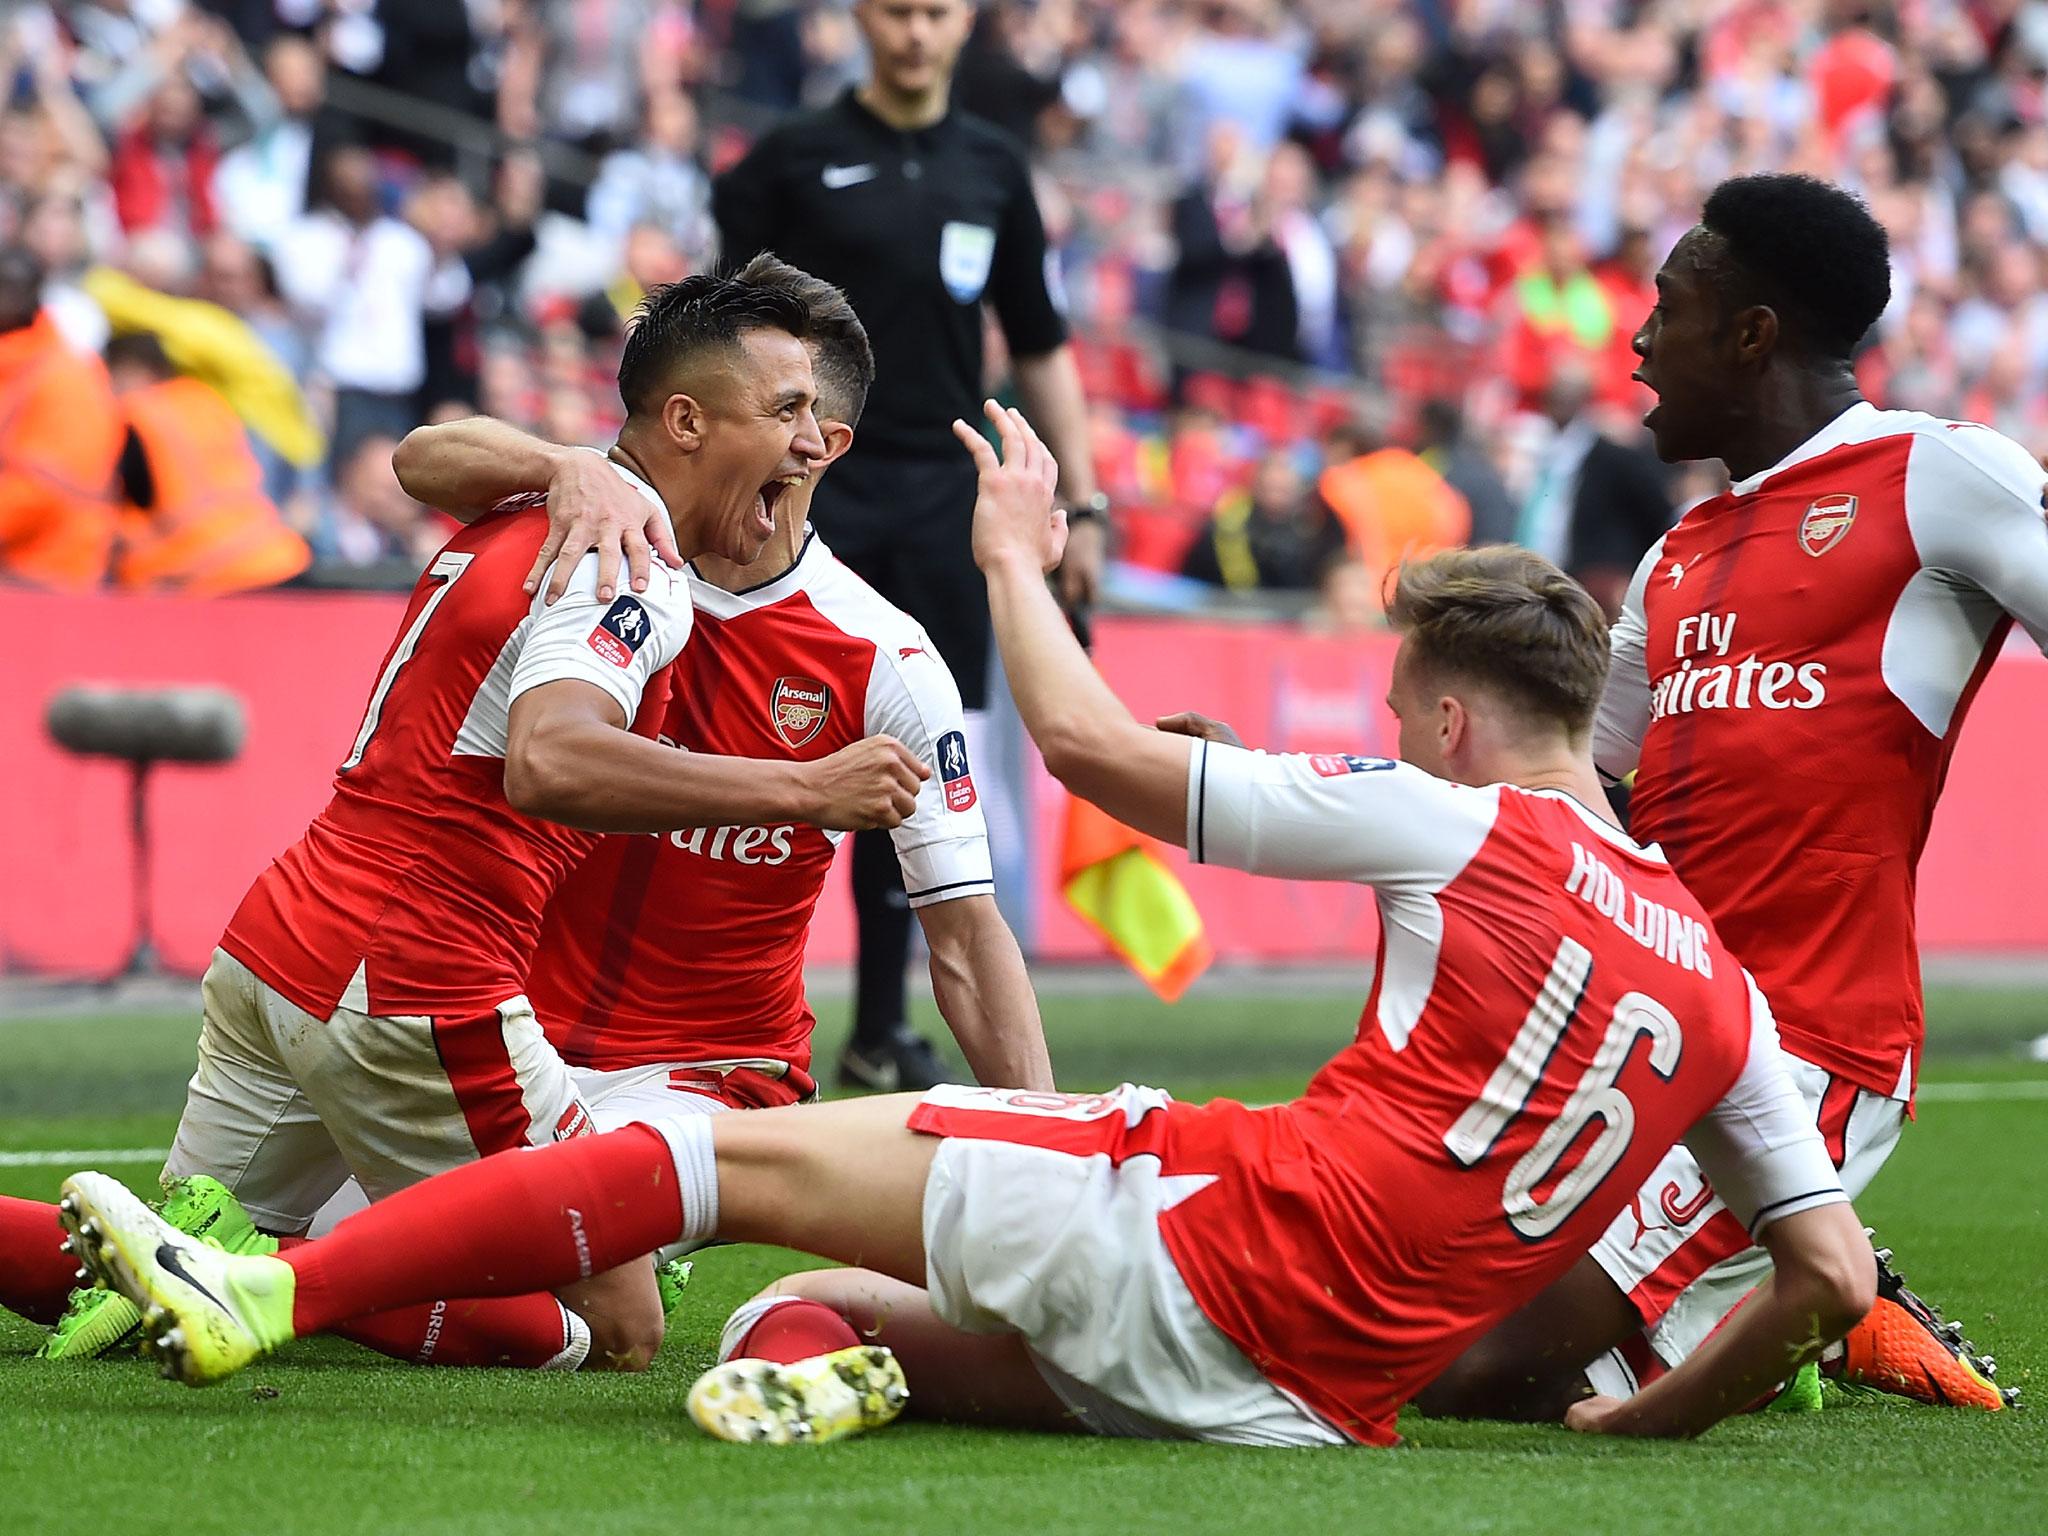 Alexis Sanchez scores the winning goal in extra-time to send Arsenal through to the FA Cup final